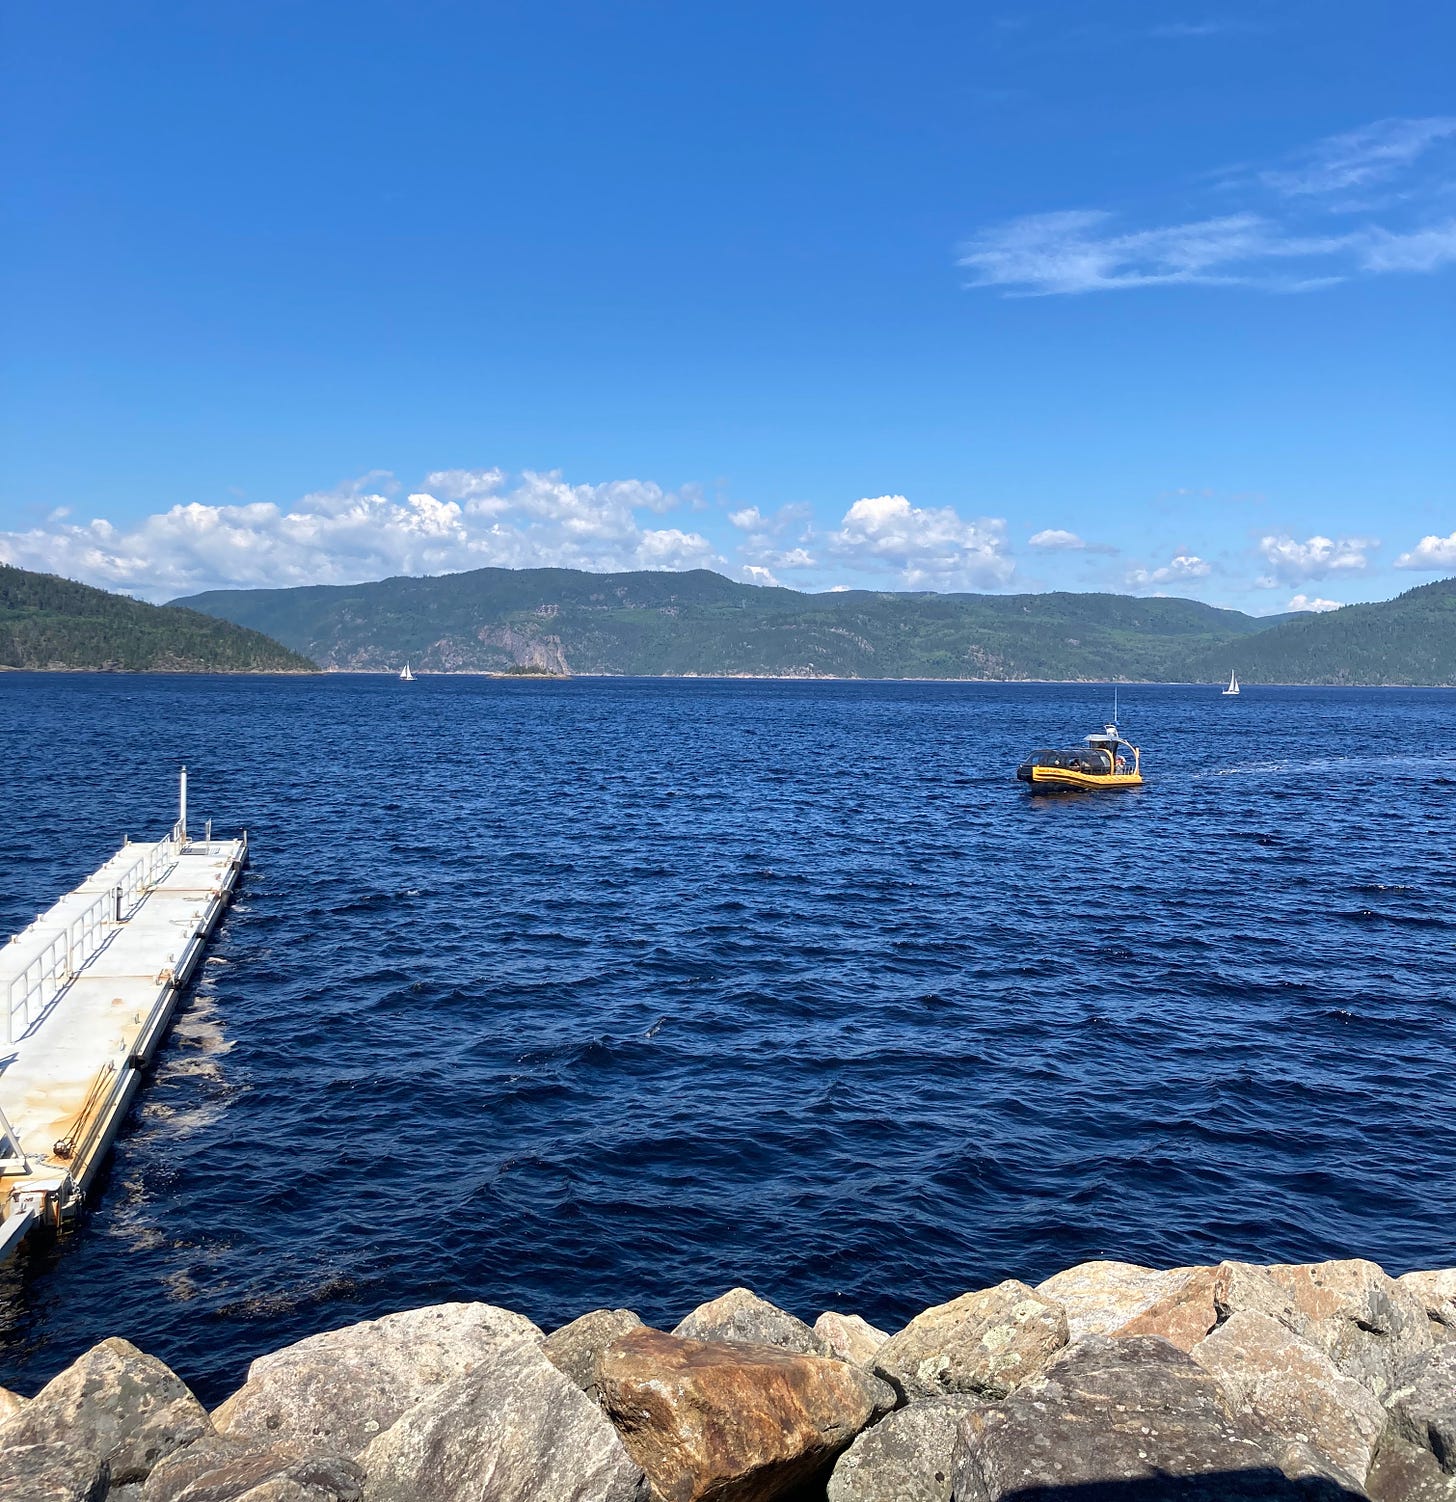 A yellow boat arriving to a floating dock. The water is deep blue, and there are green hills in the background.